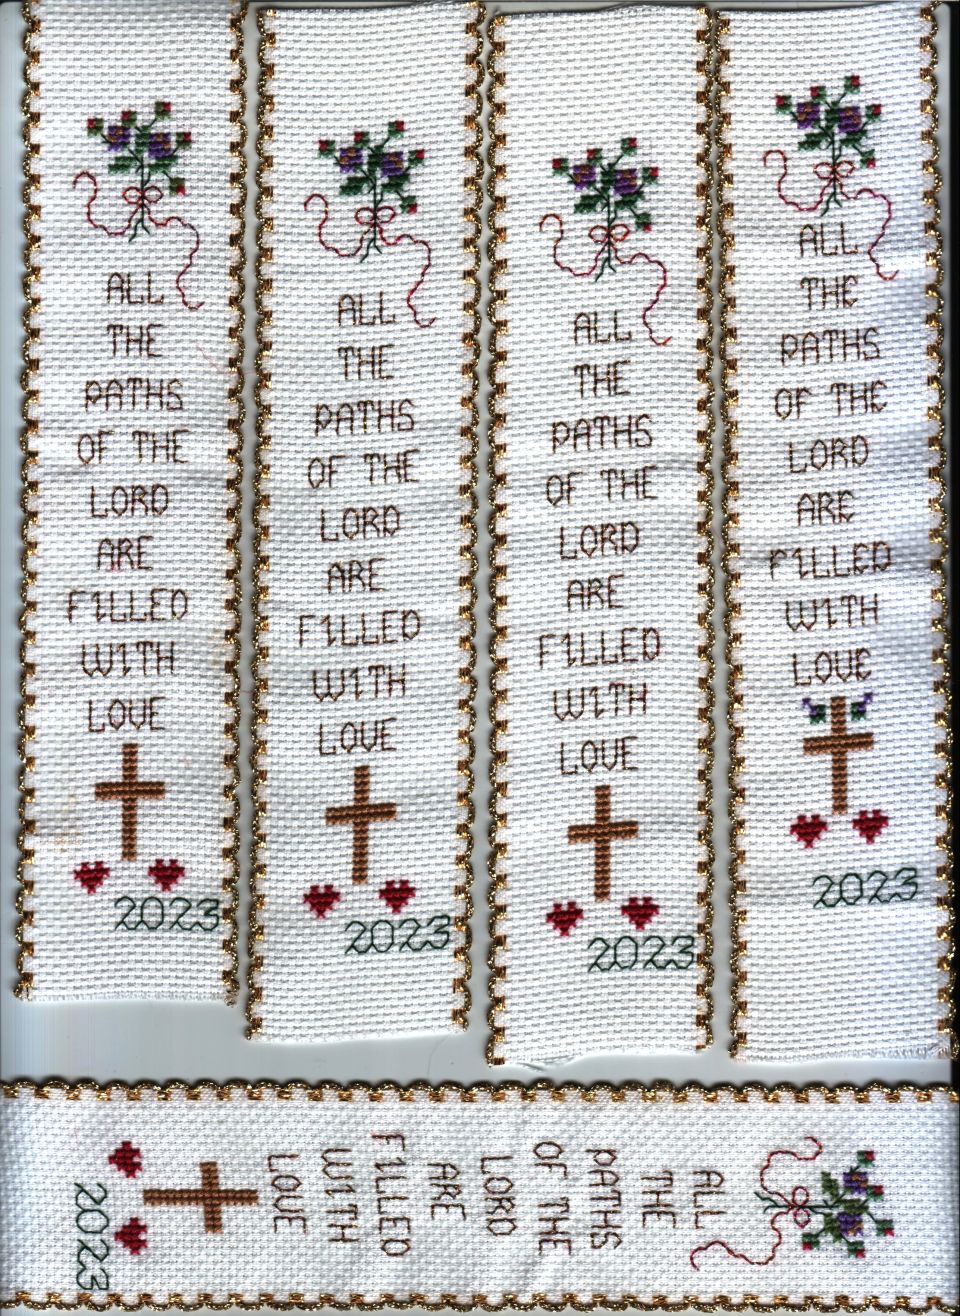 "All The Paths" Biblemarker From Love Brought Us Together booklet by Stoney Creek1987. On 14 count Ribband, Changed out some of the floss colors and some to metallic floss.